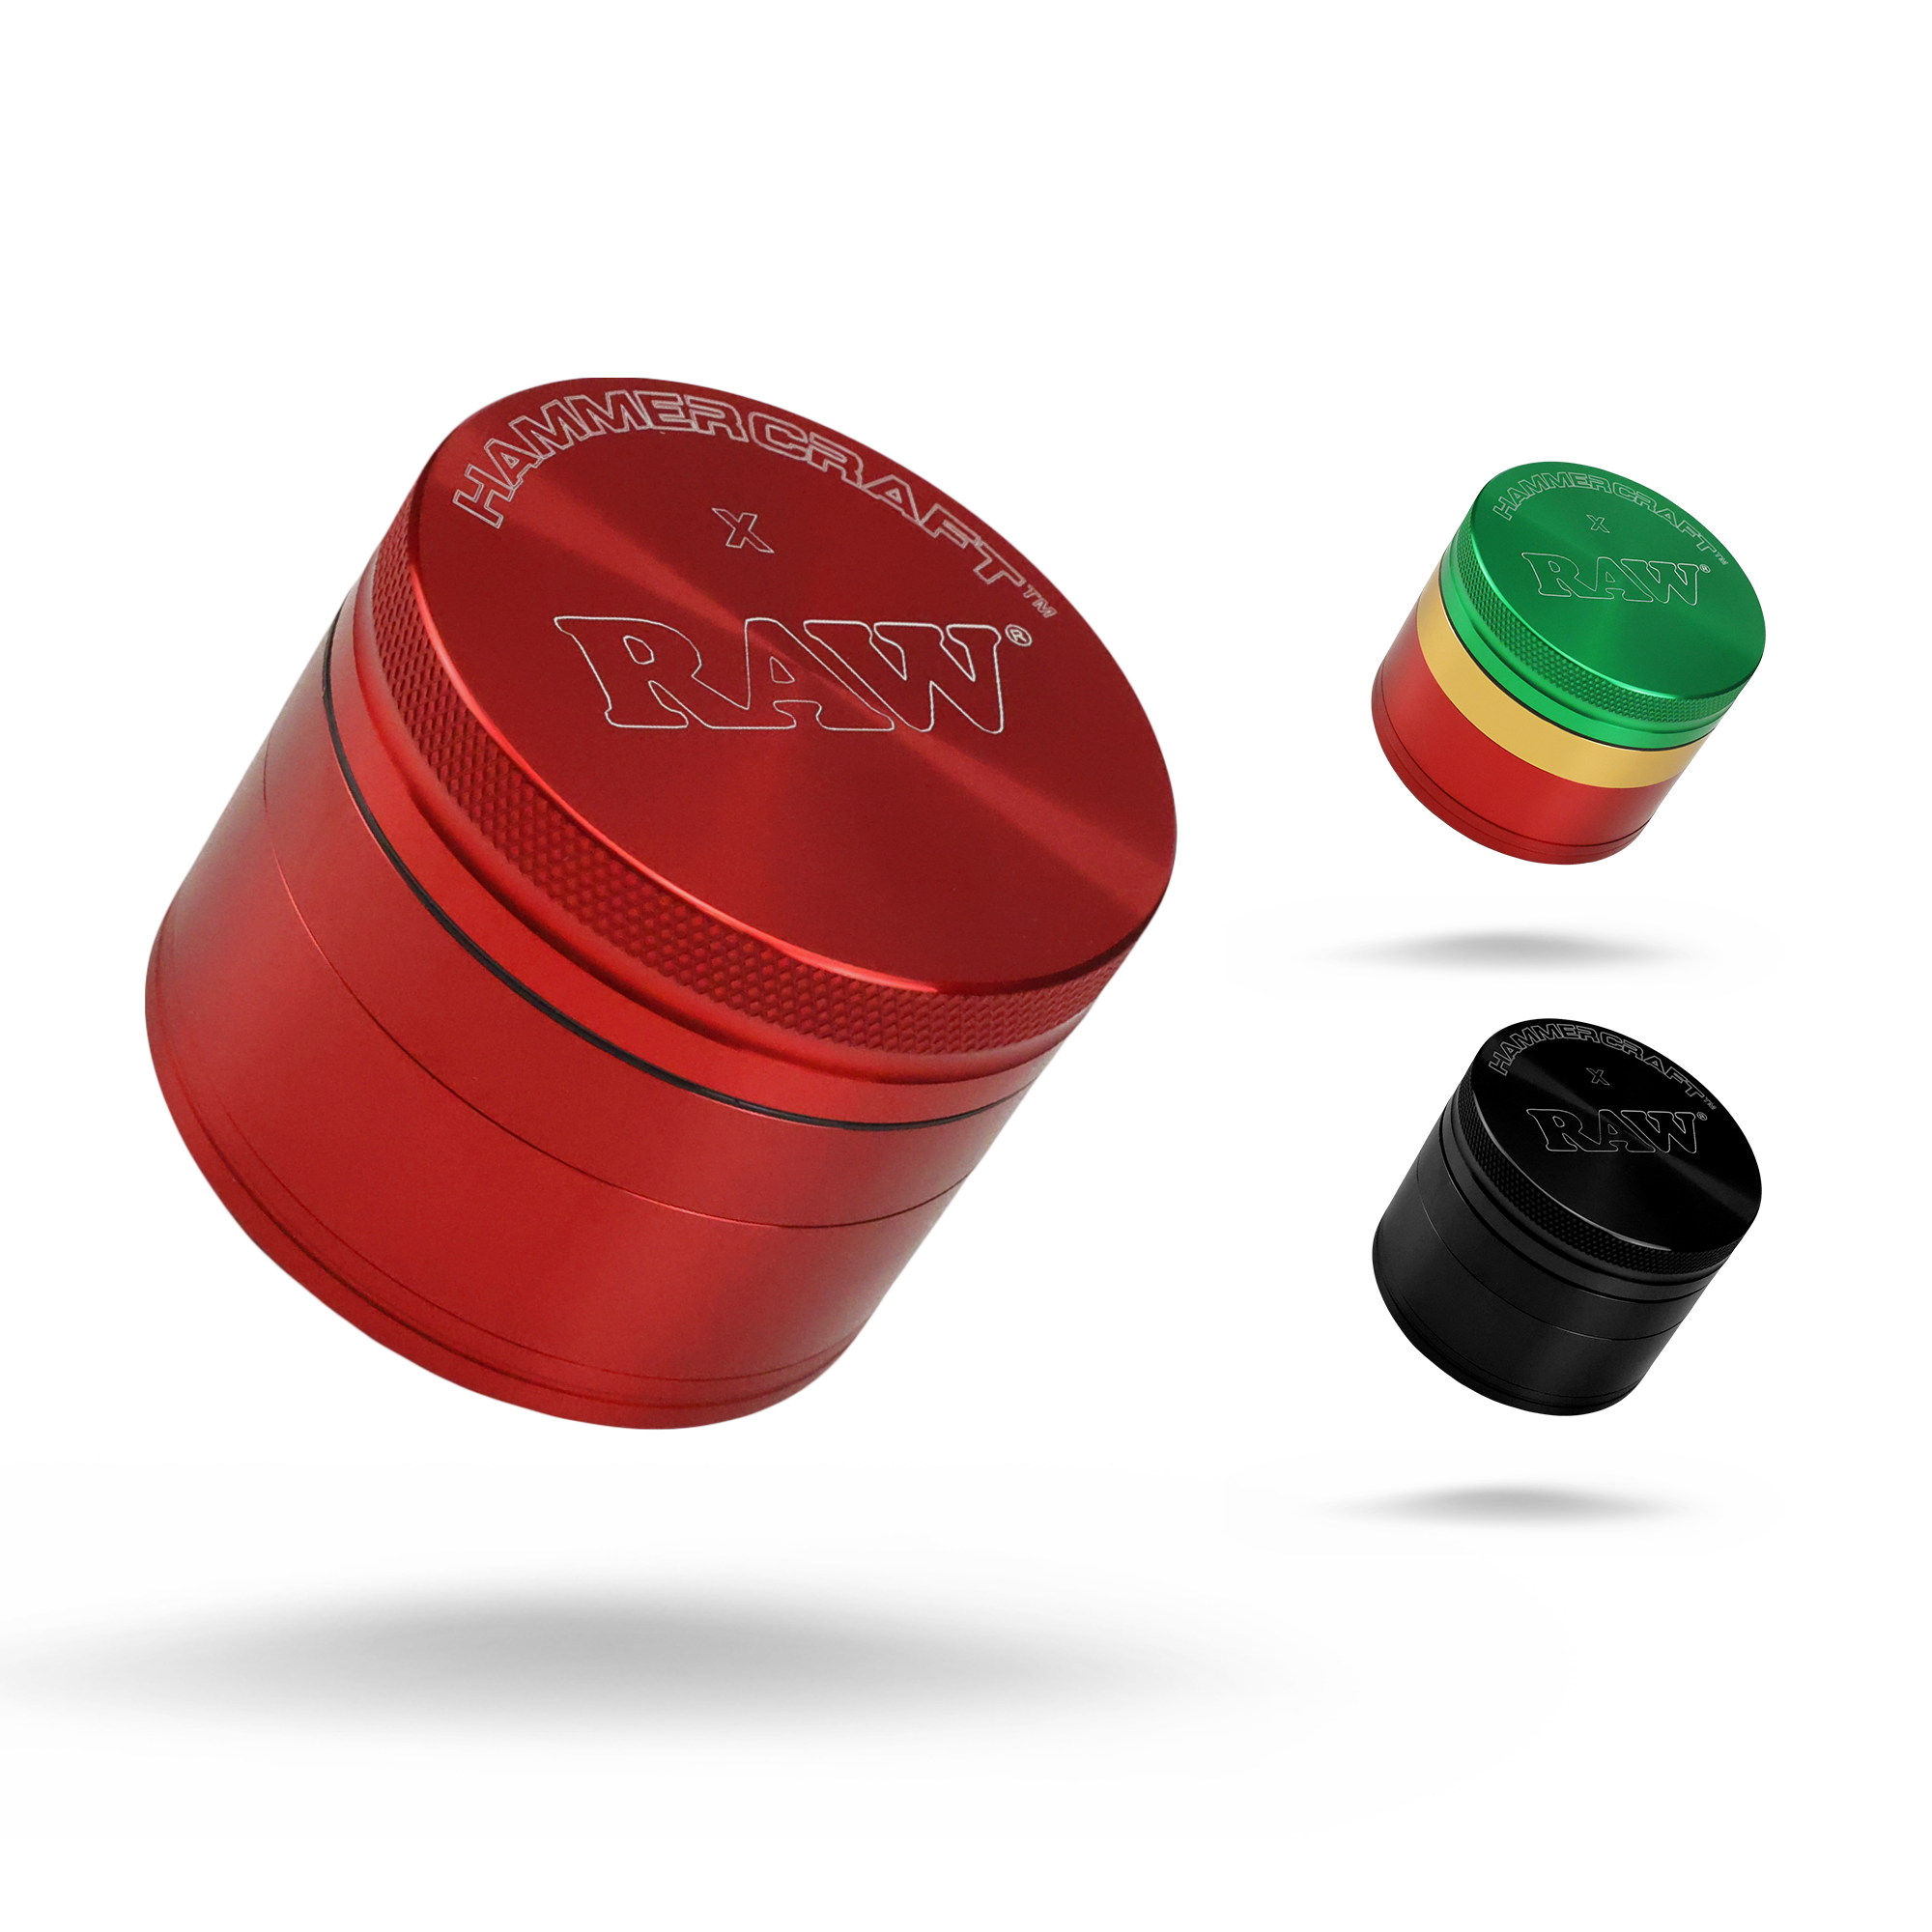 Buy RAW Hands-Free Smoker Online - ESD Official